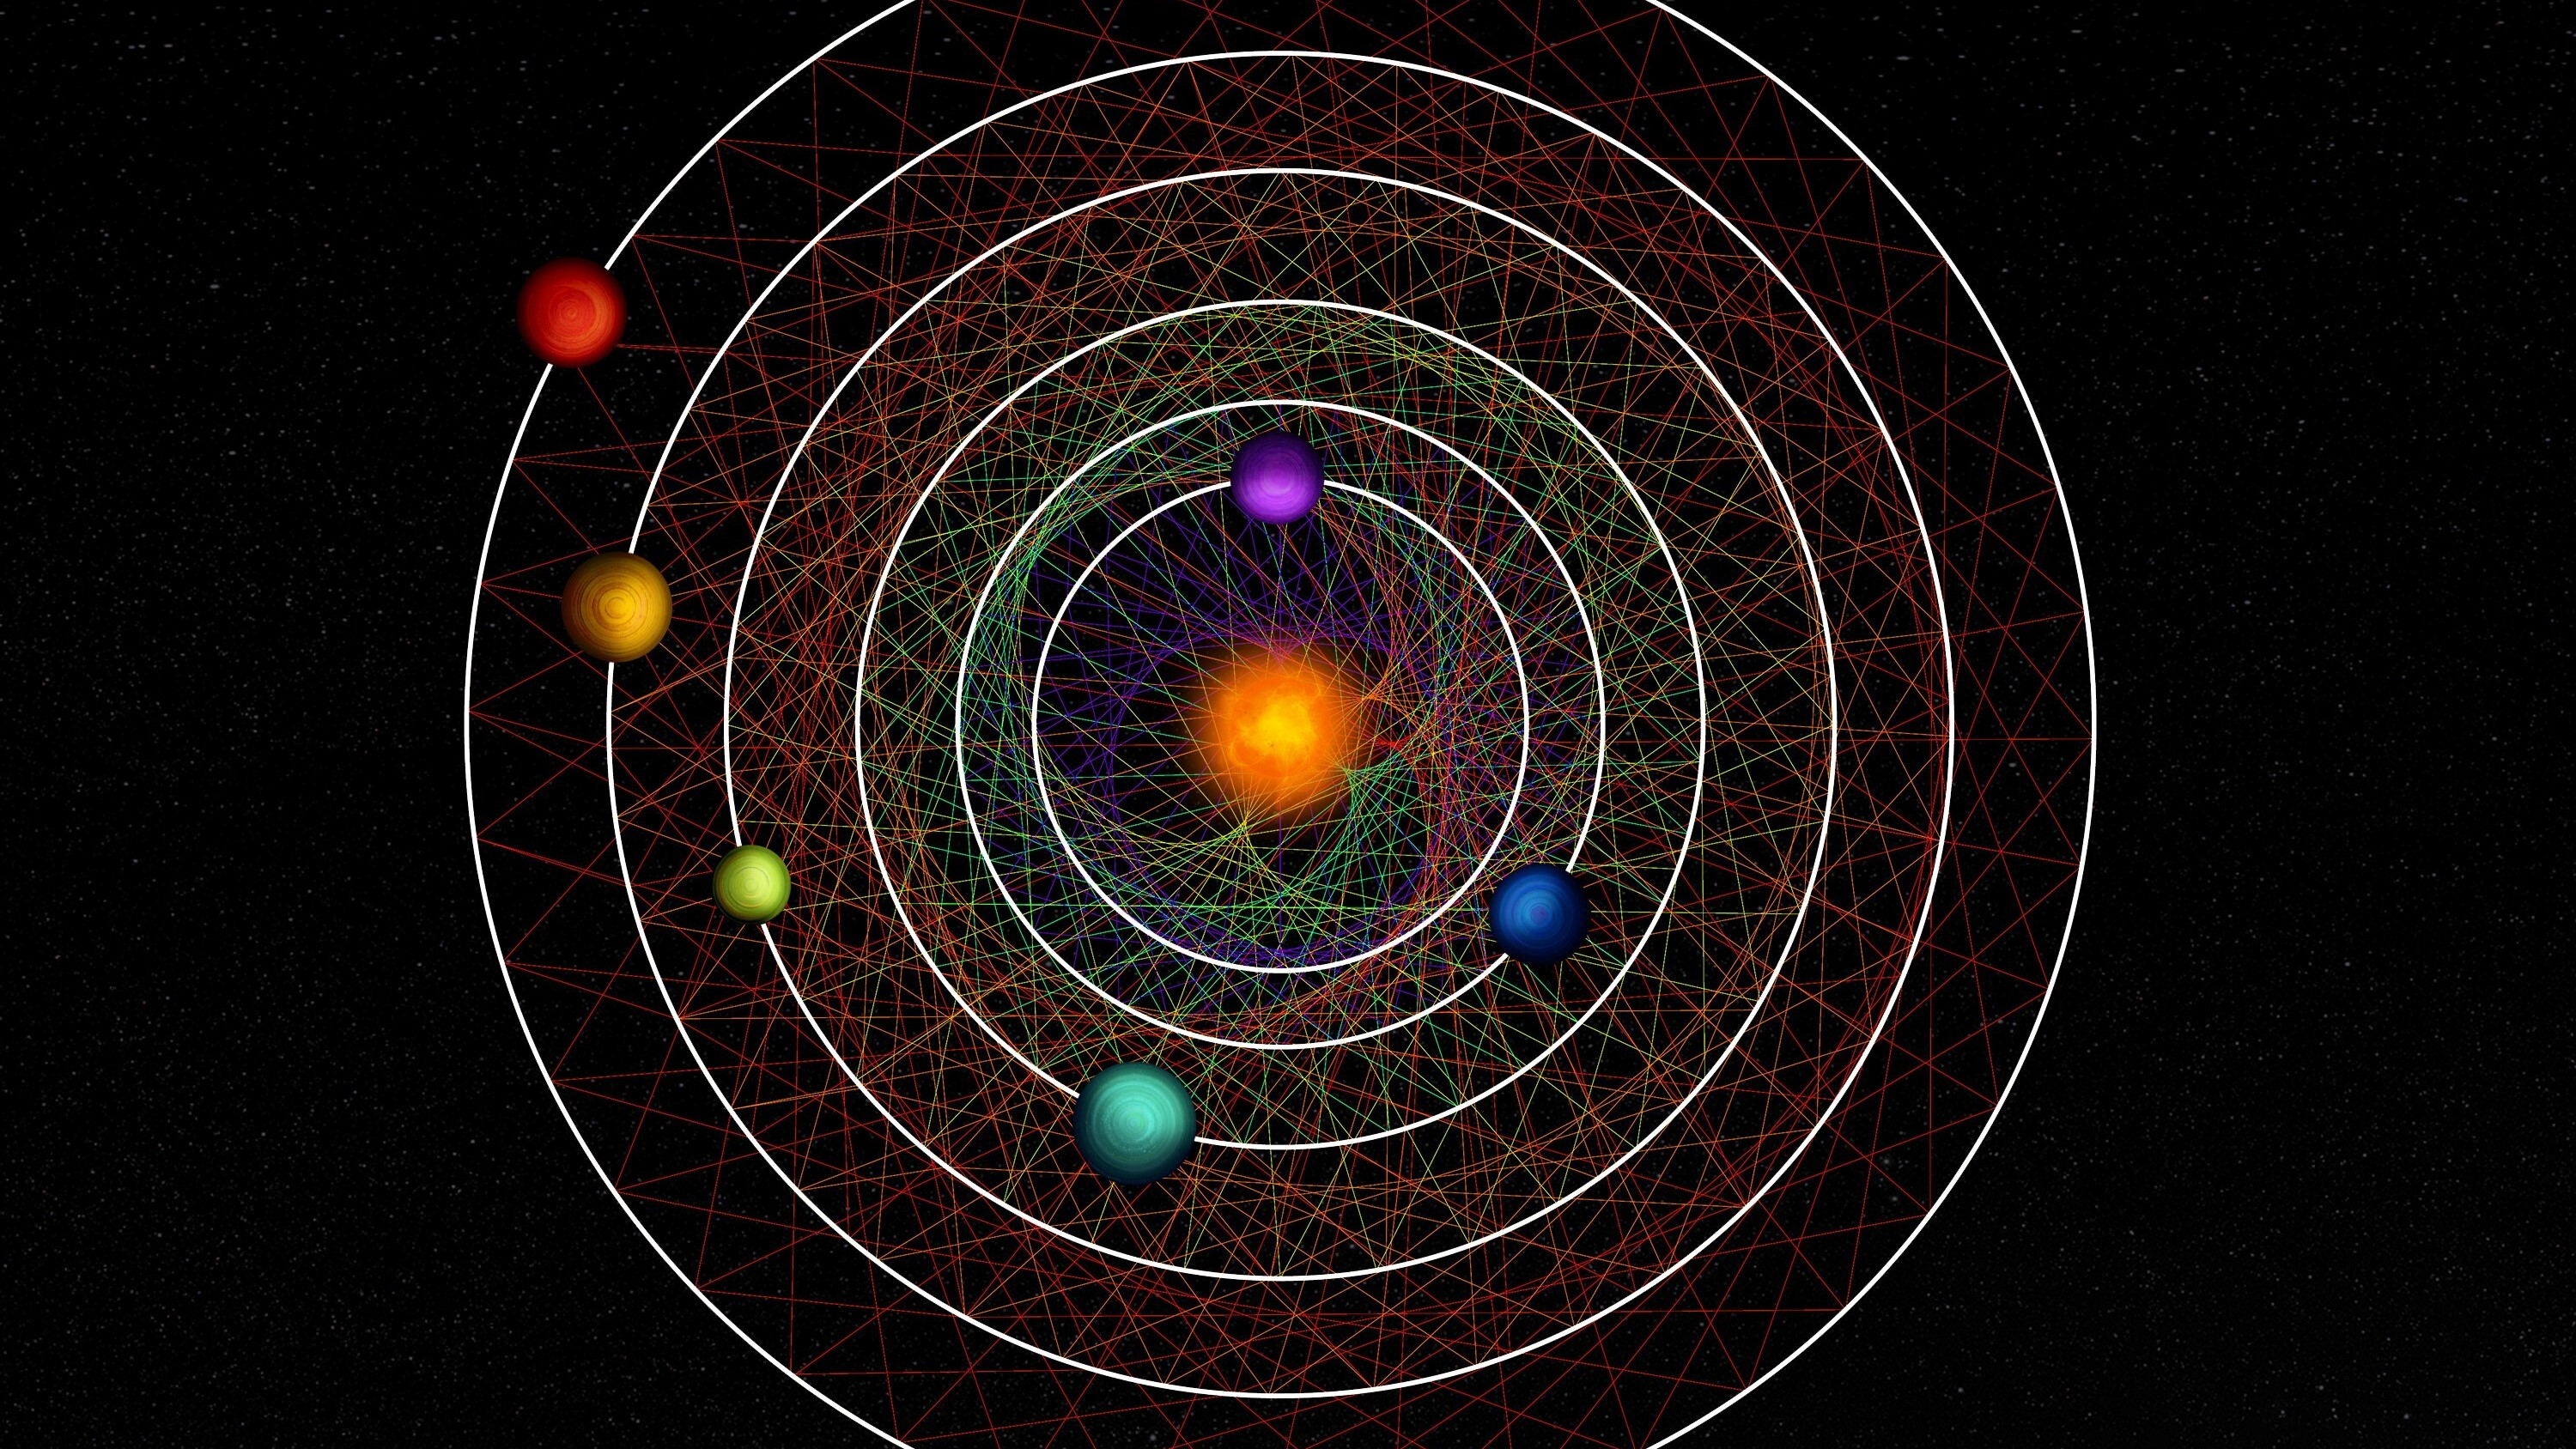 an orange star is orbited by six planets, each a different color. their orbits are outlined with white circles